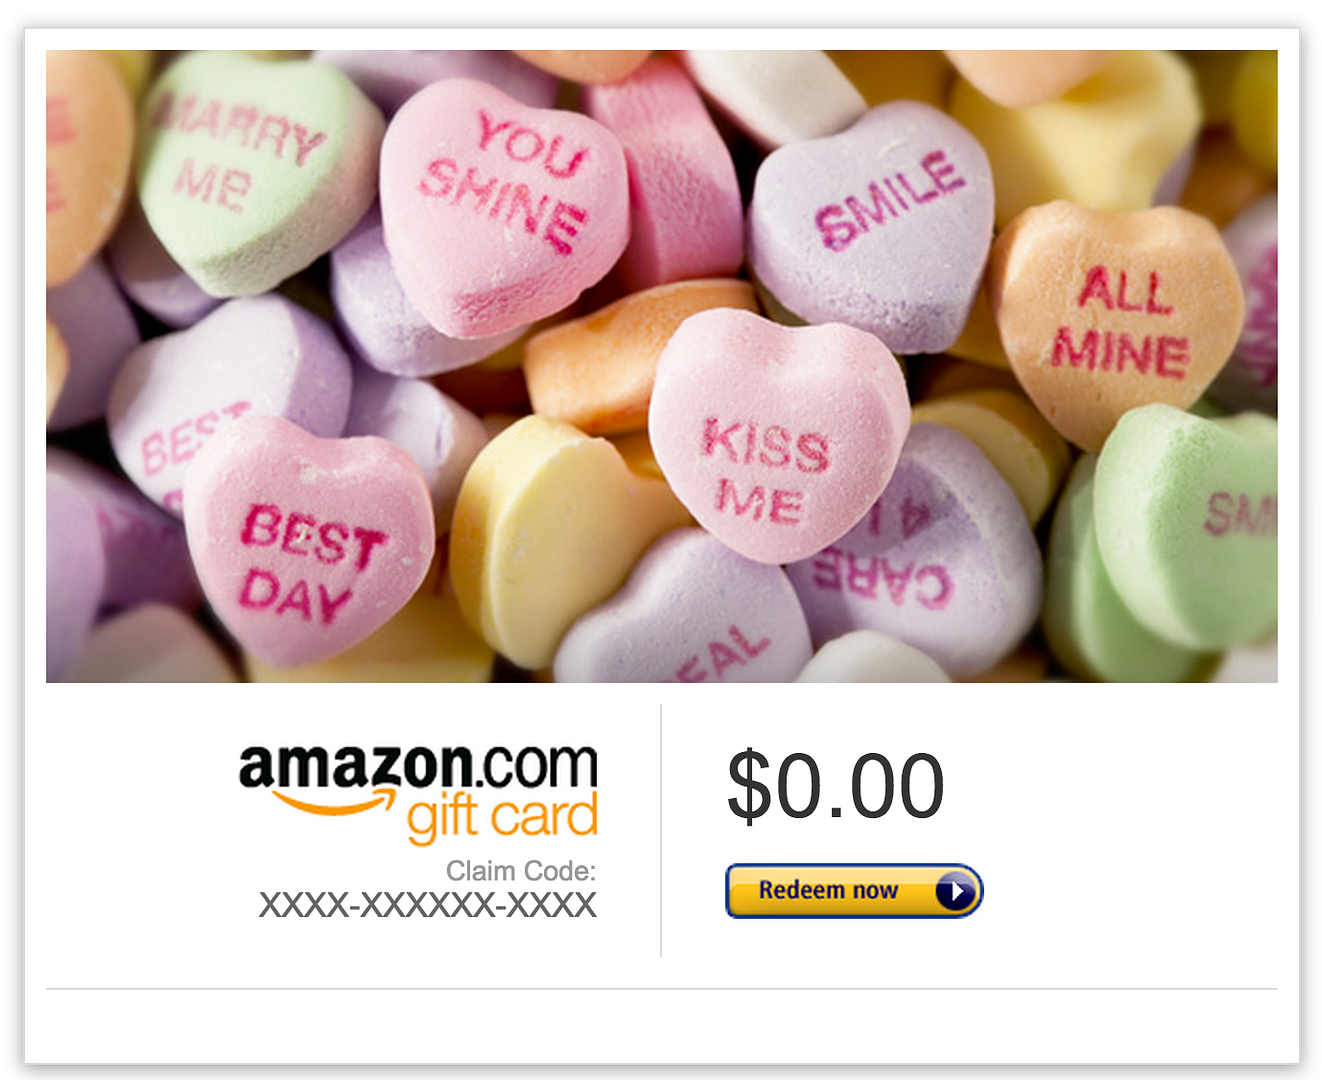 Valentine's Day themed gift cards on Amazon